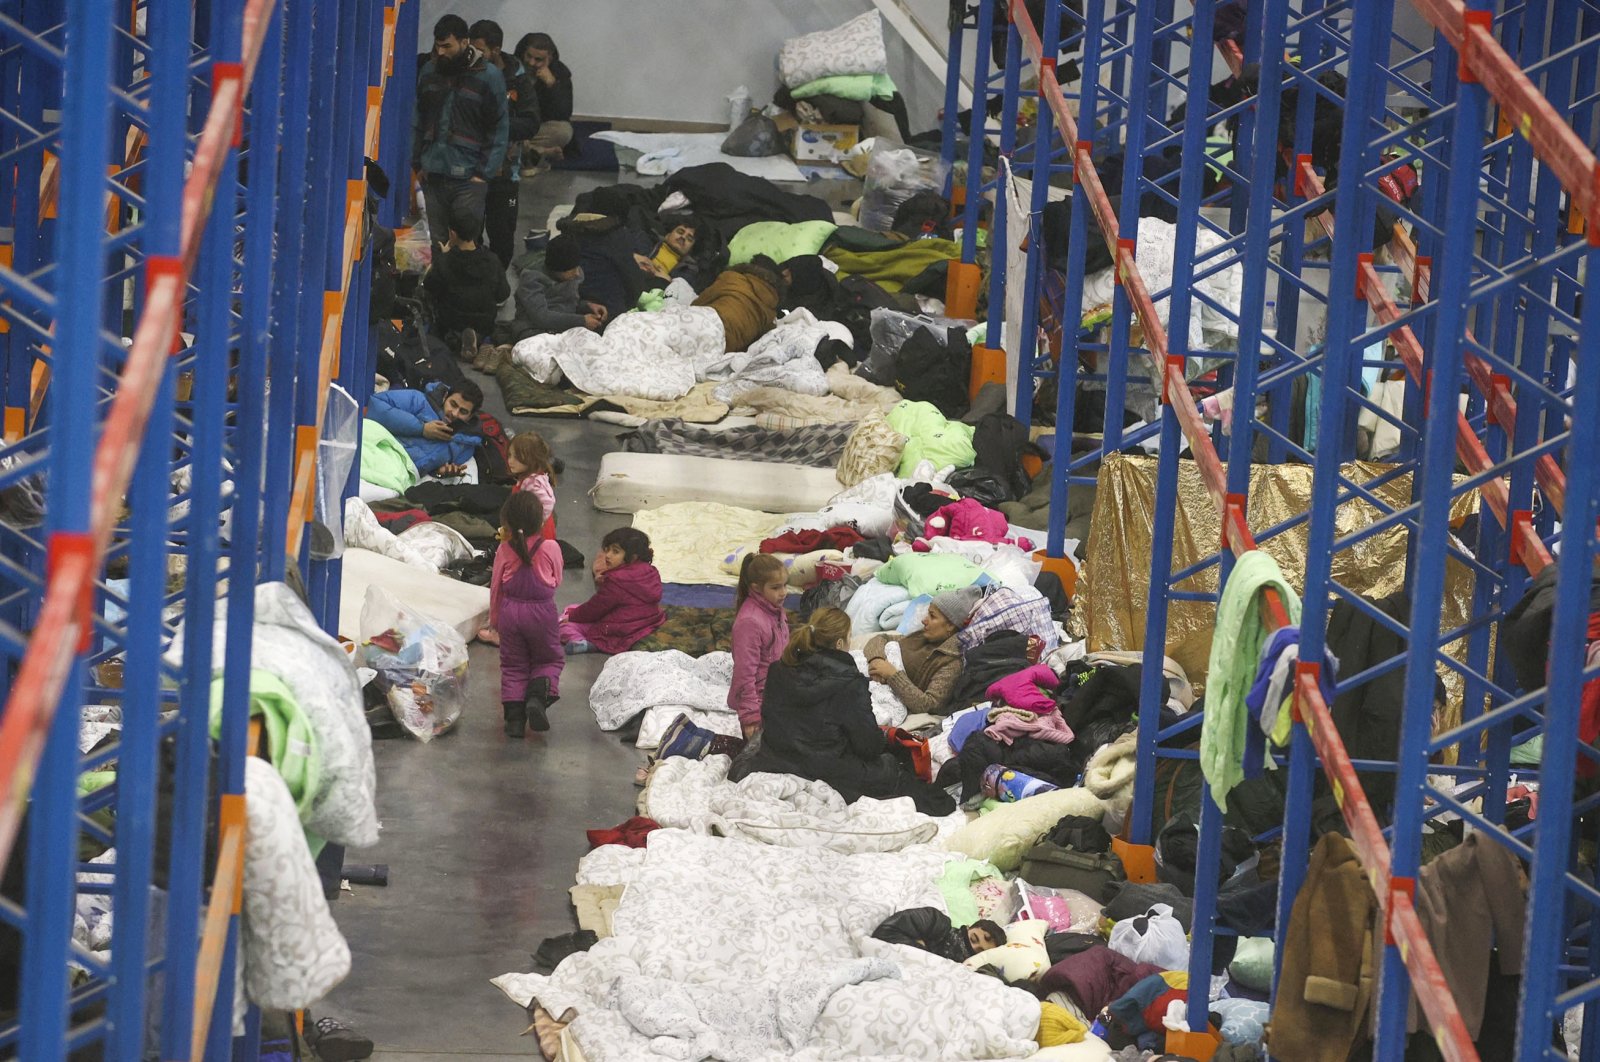 Migrants settle for the night in the logistics center in the checkpoint "Kuznitsa" at the Belarus-Poland border near Grodno, Belarus, Nov. 18, 2021. (AP Photo)